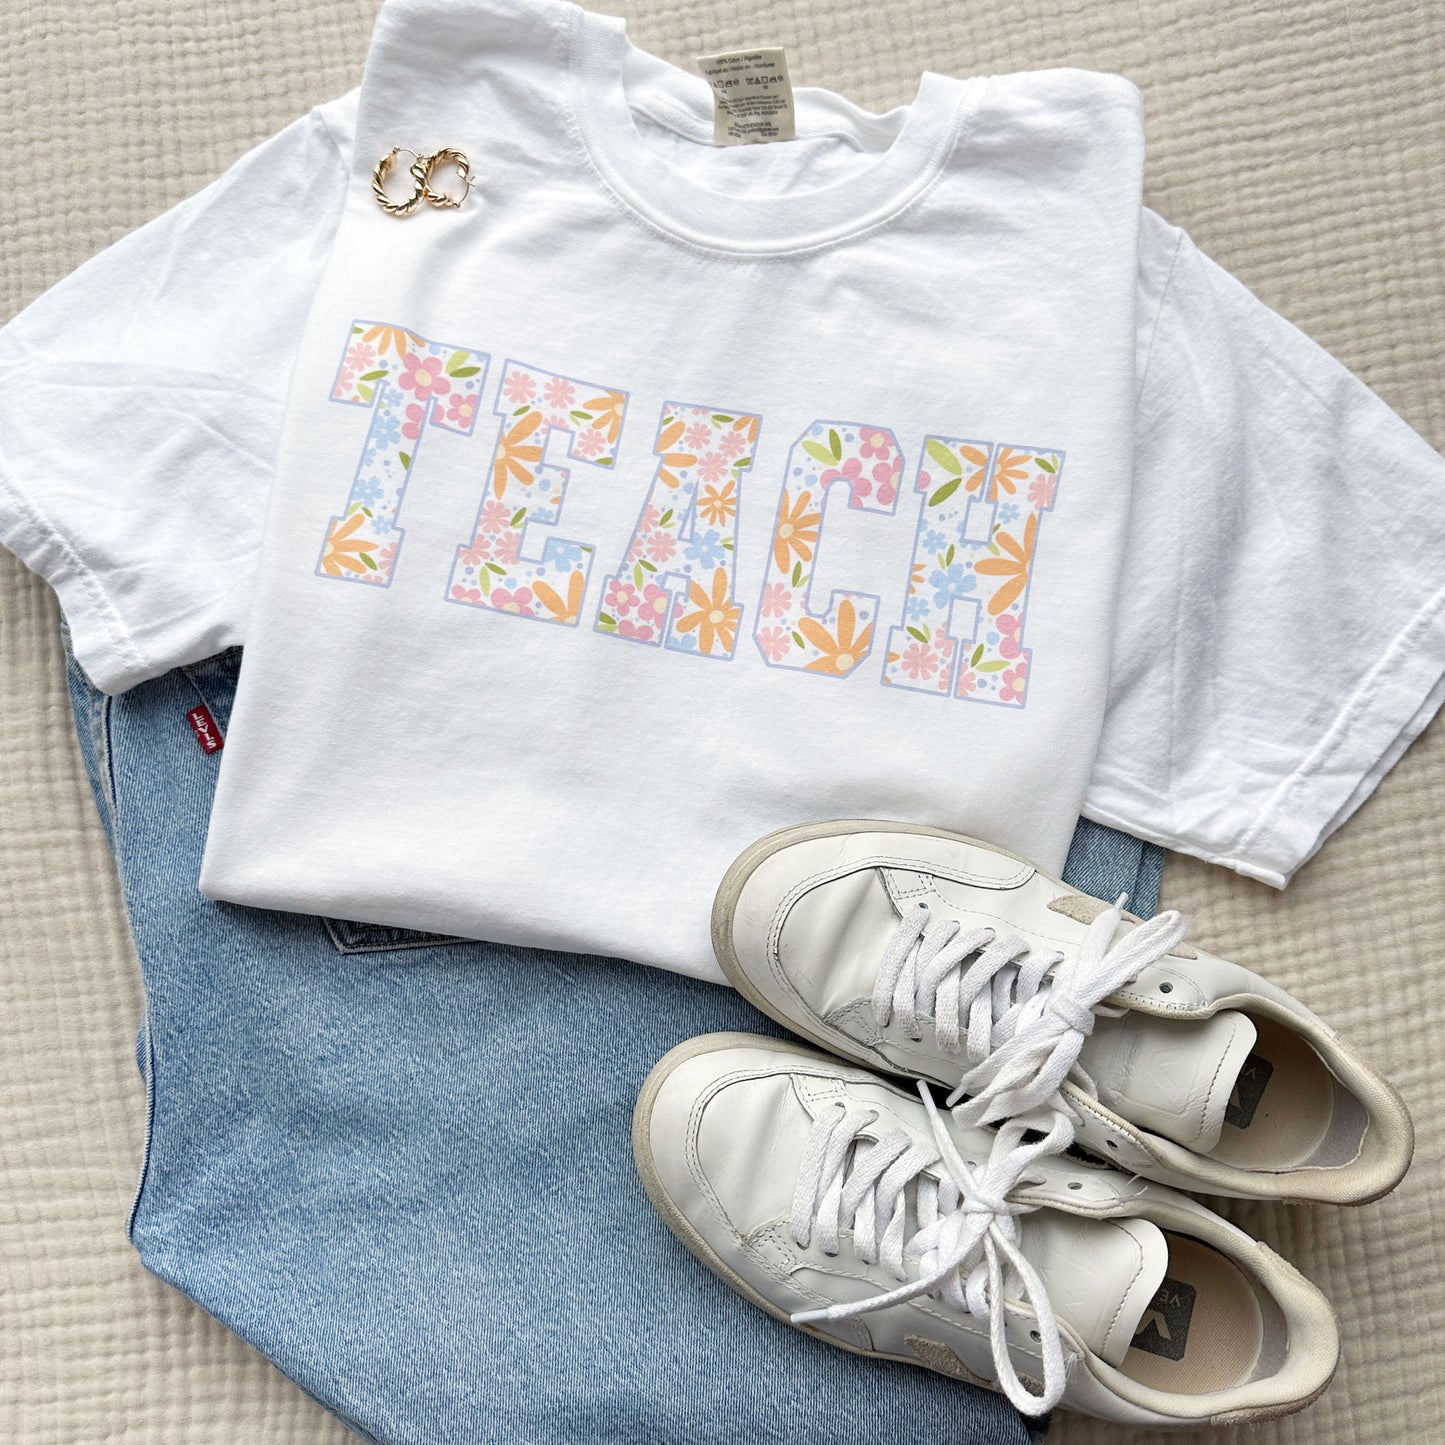 outfit for teacher featuring a white comfort colors t-shirt with cute large TEACH floral printed design across the chest.